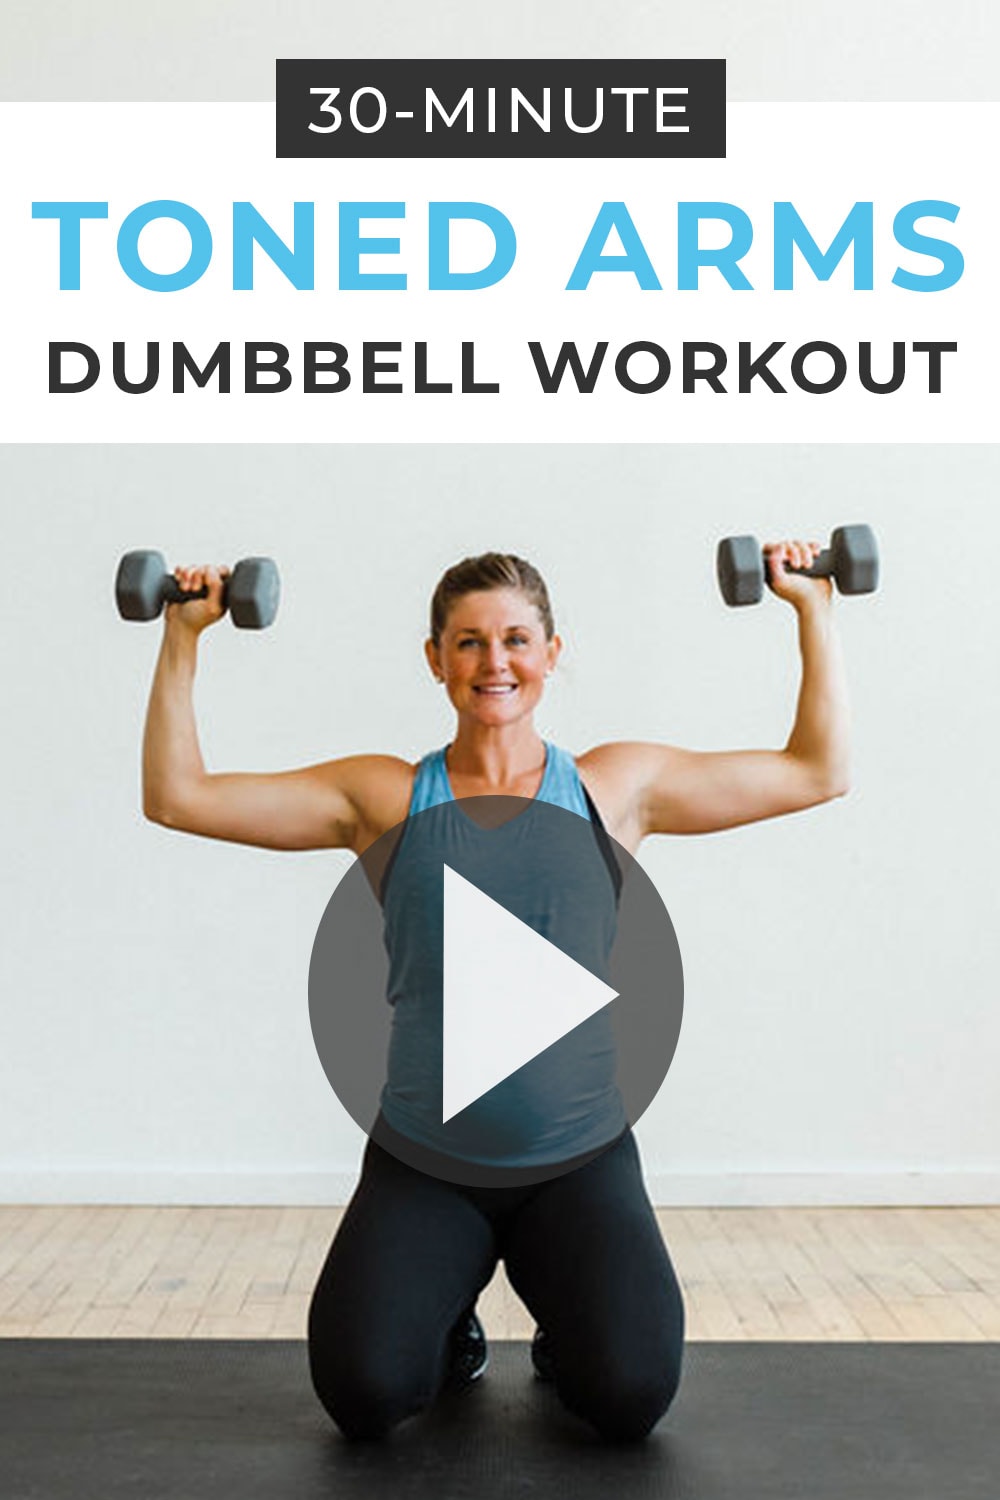 30 Minute Dumbbell Arm Workout For Women Nourish Move Love